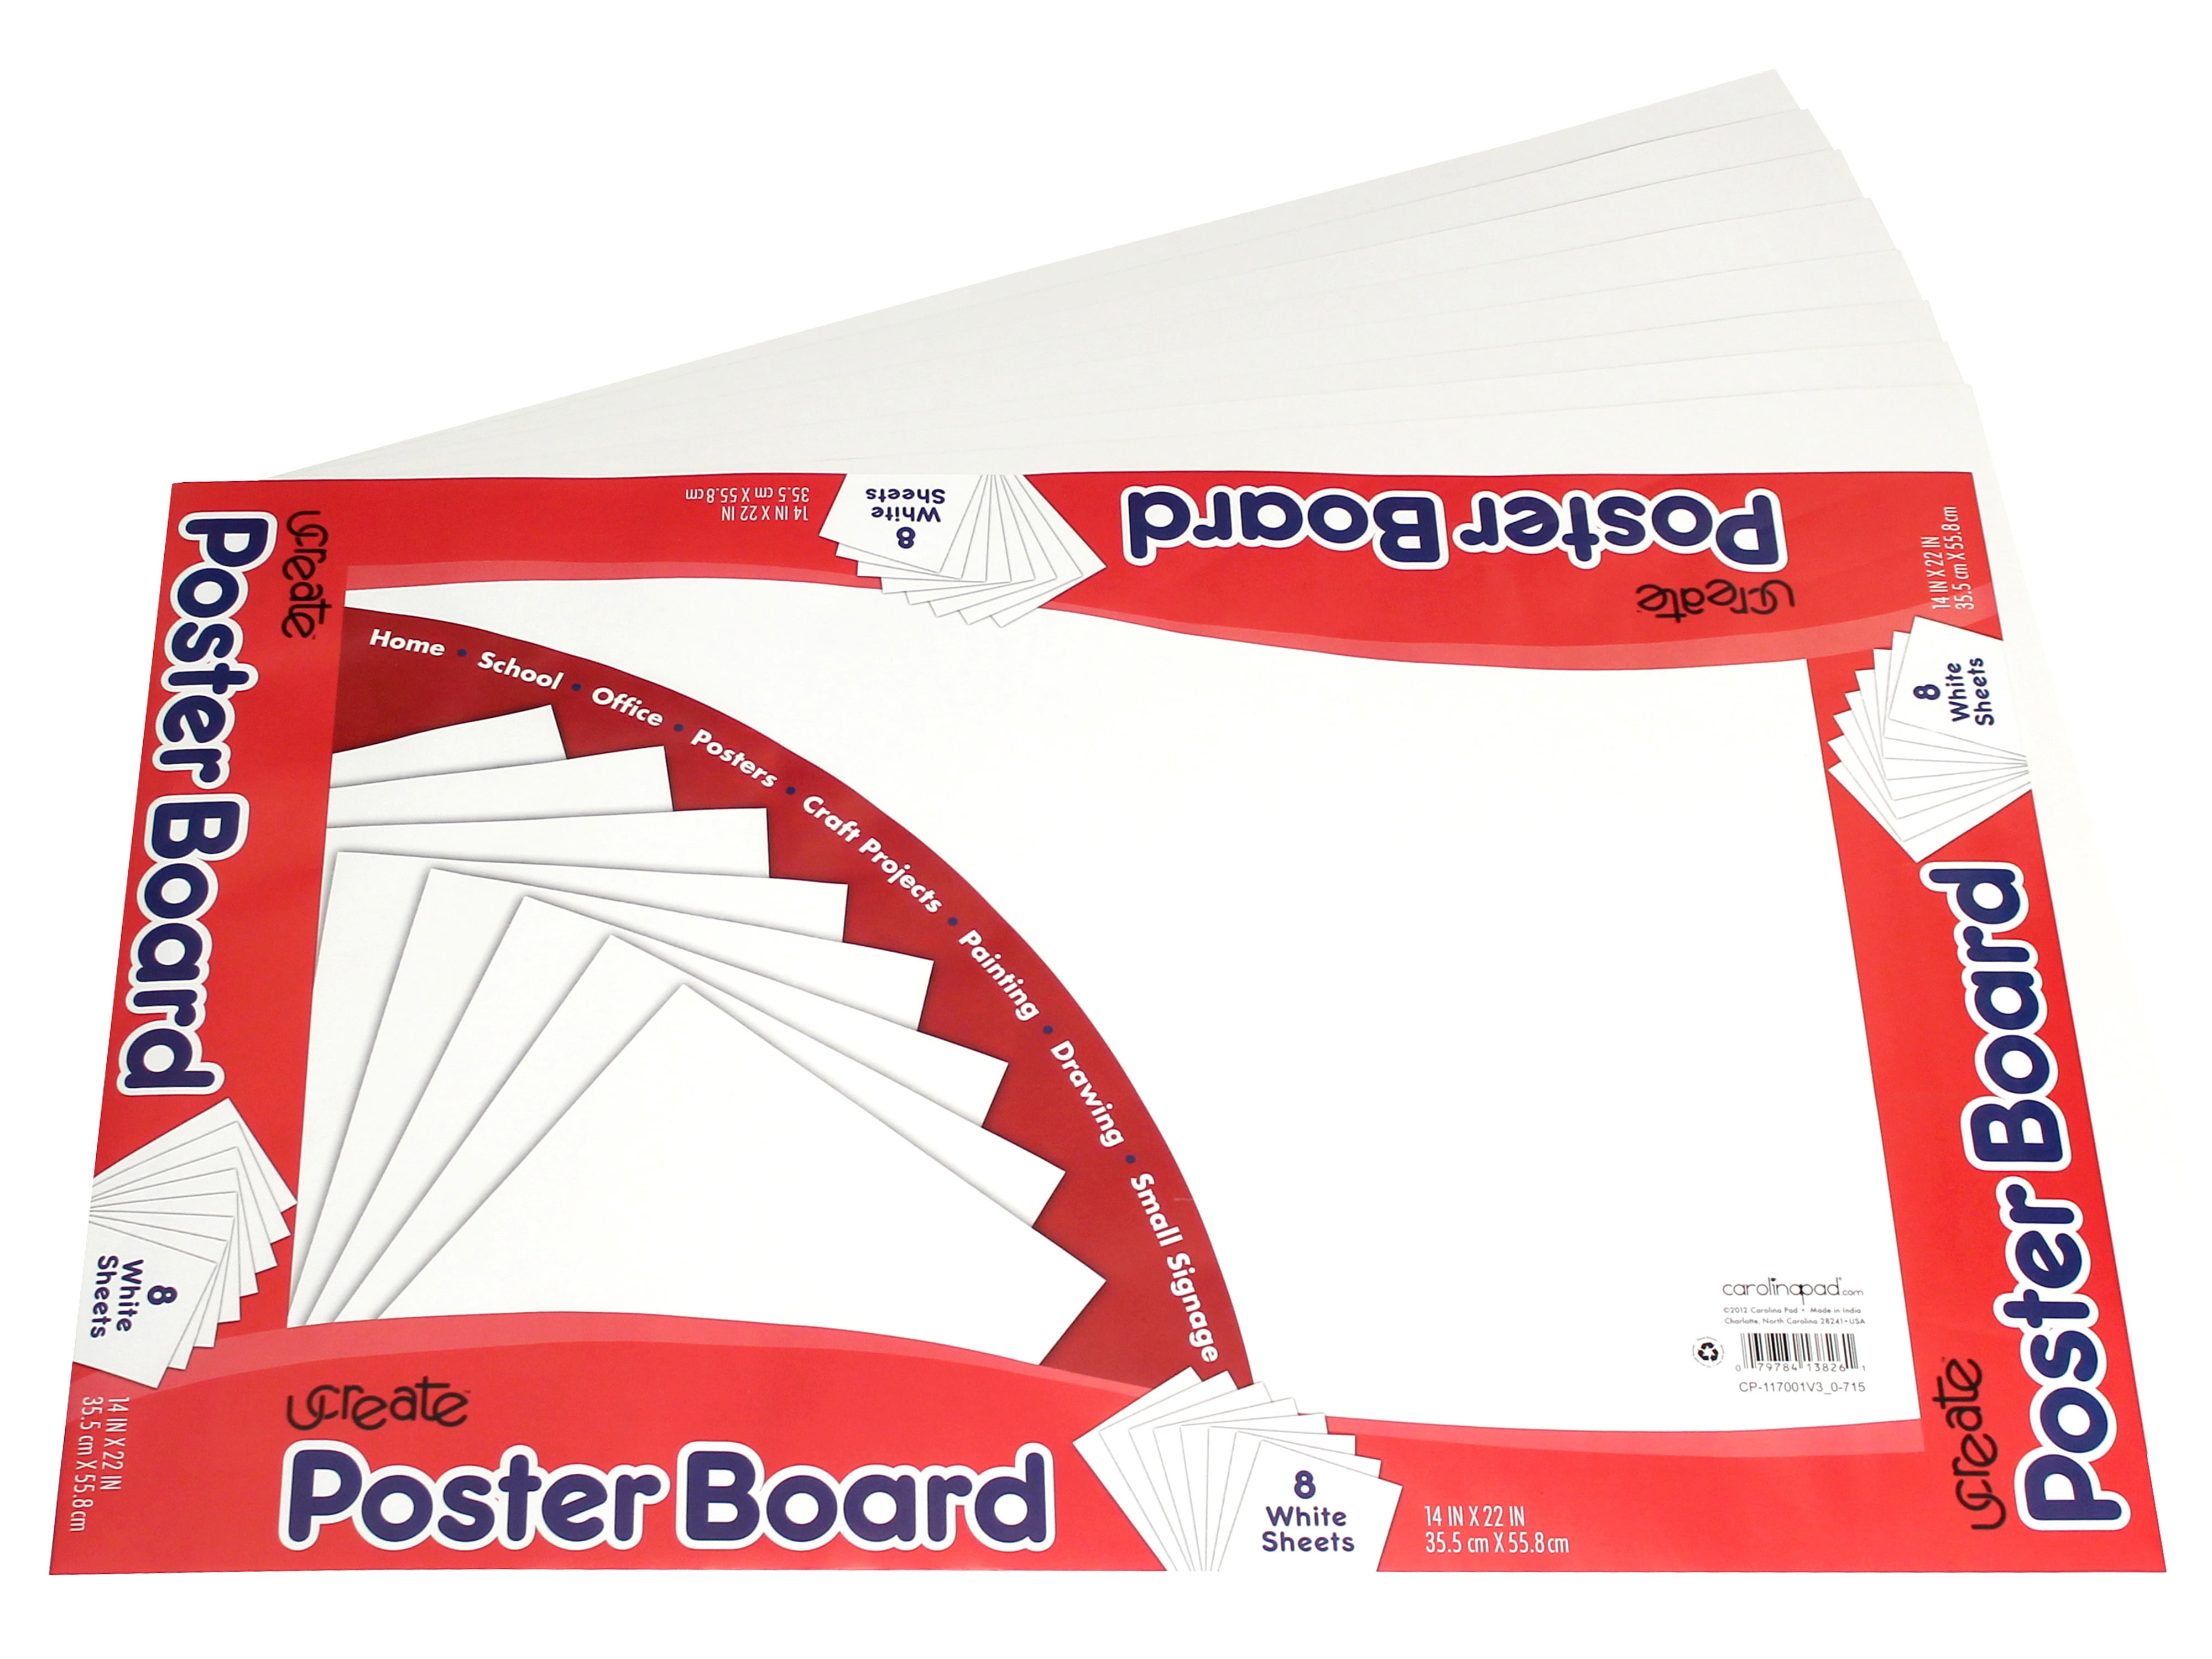 Premium Coated Poster Board, 14 X 22, White, 8/pack | Bundle of 5